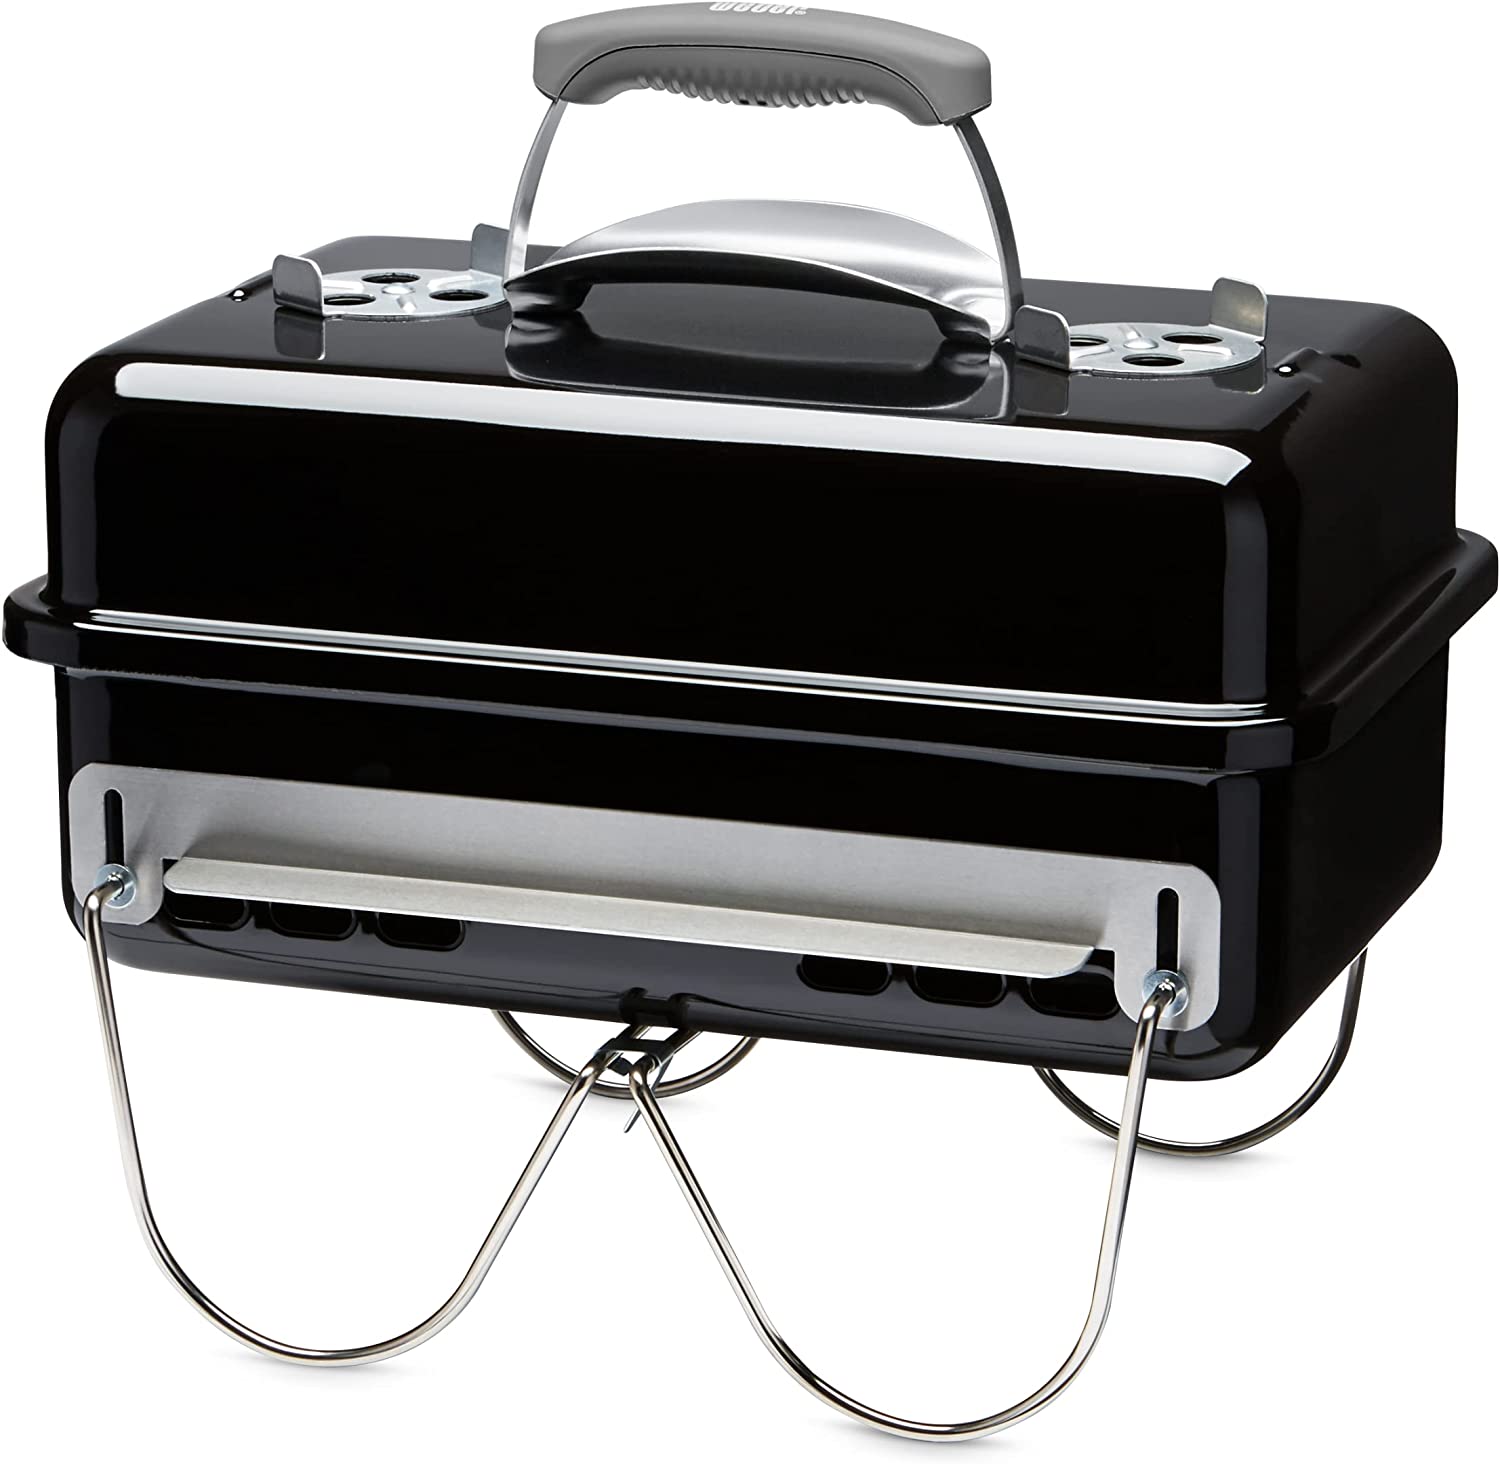 Weber Go Anywhere Portable Charcoal Grill, 42 x 26 cm, Black (1131004)